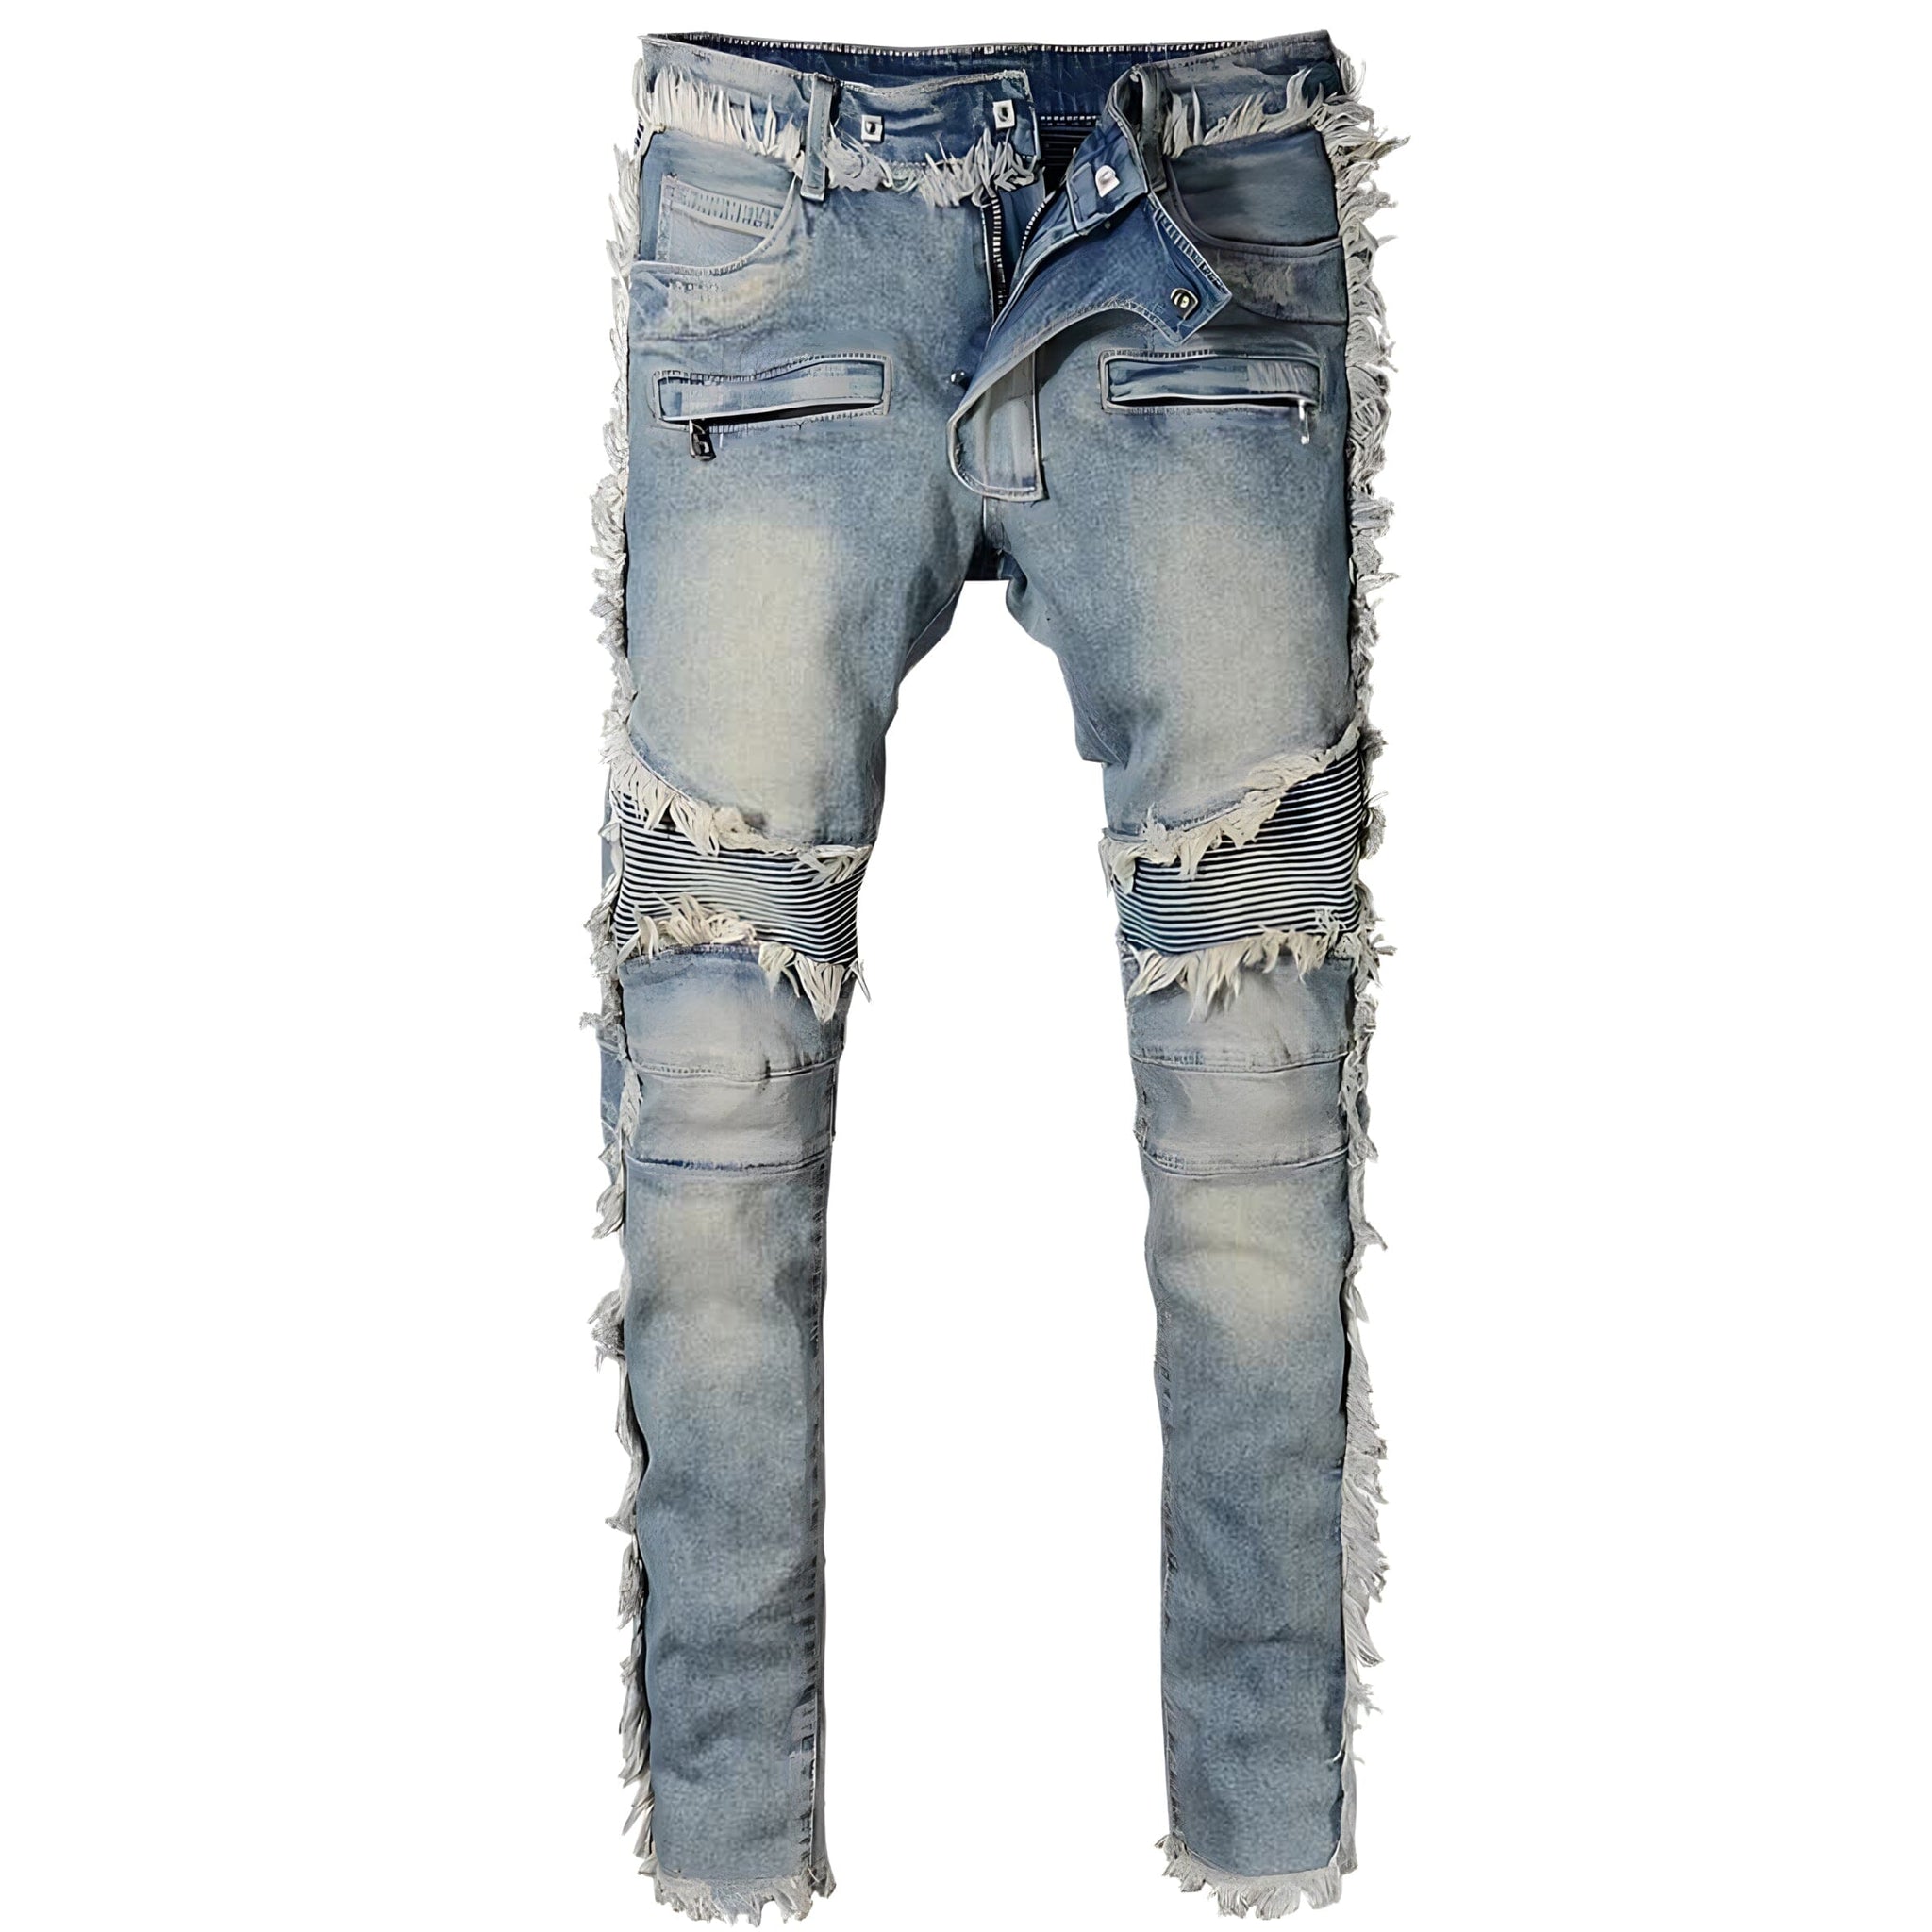 The "Fray" Distressed Denim Jeans